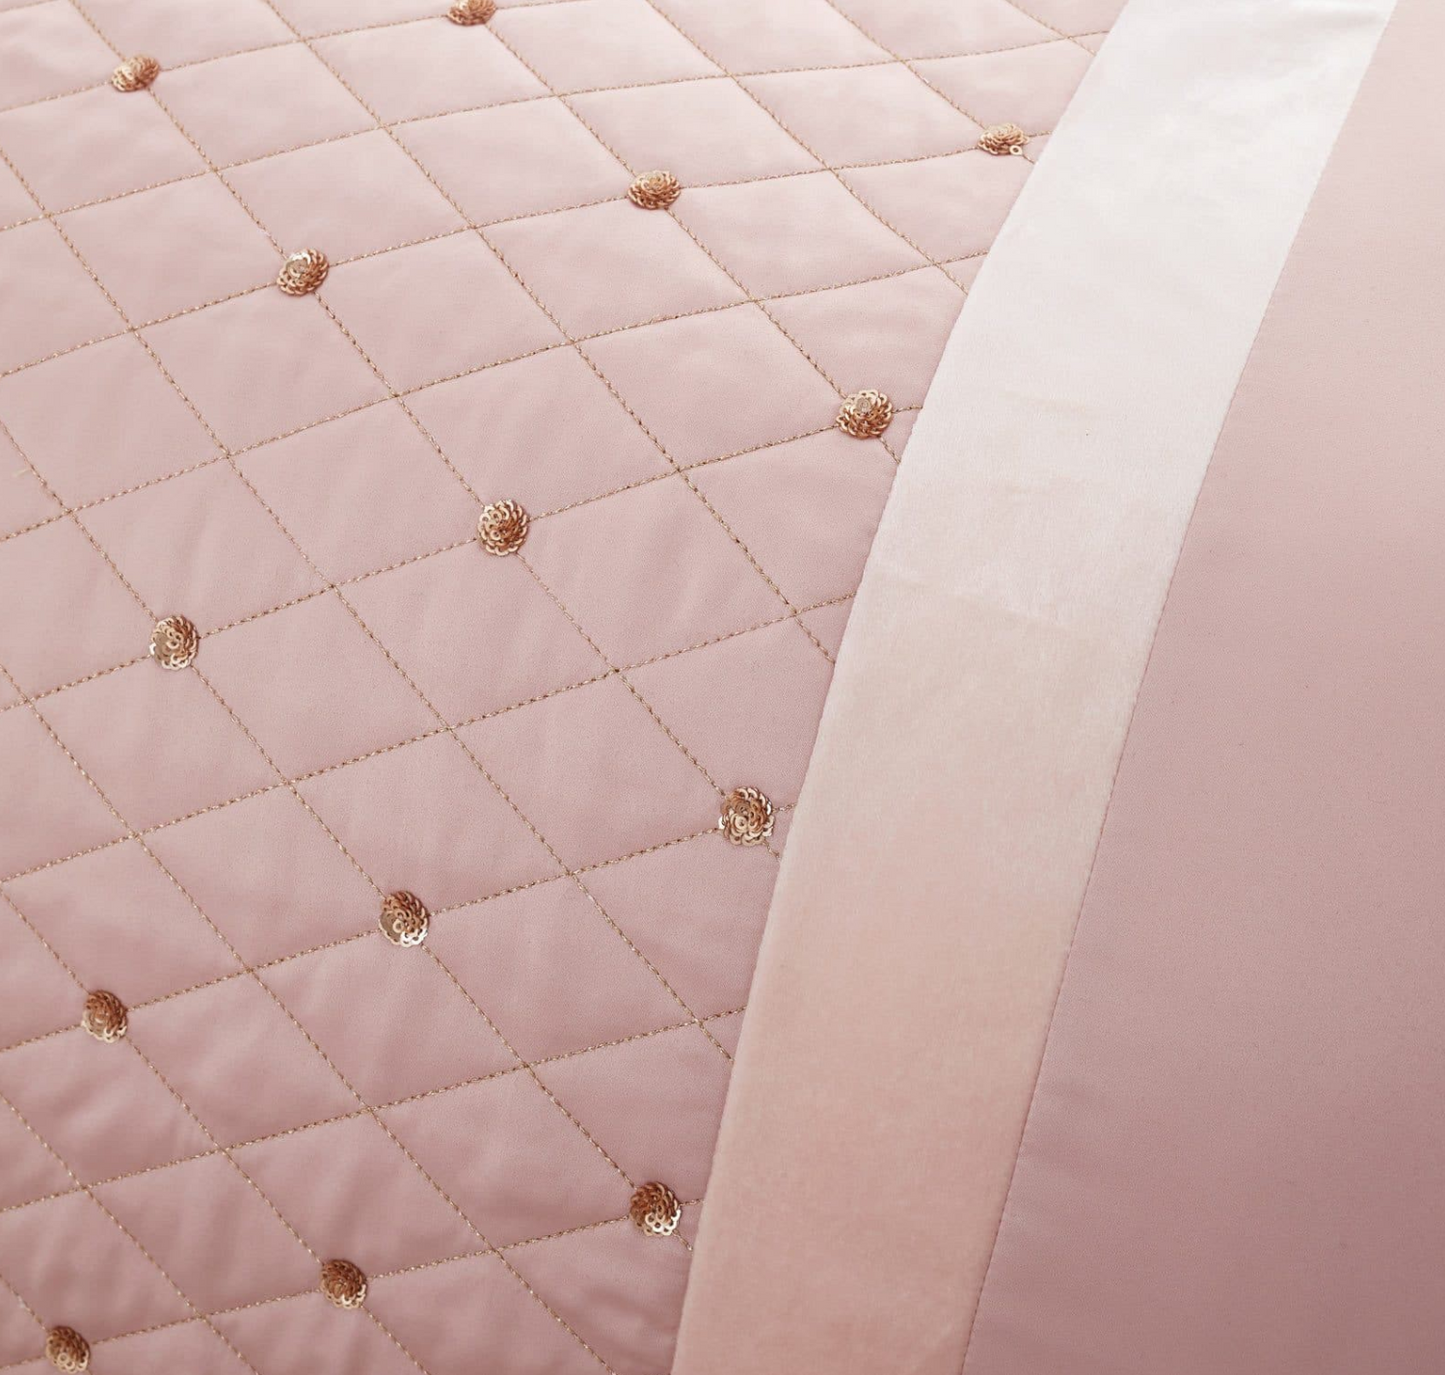 Quilted border with sequin embellishment creates an elegant look